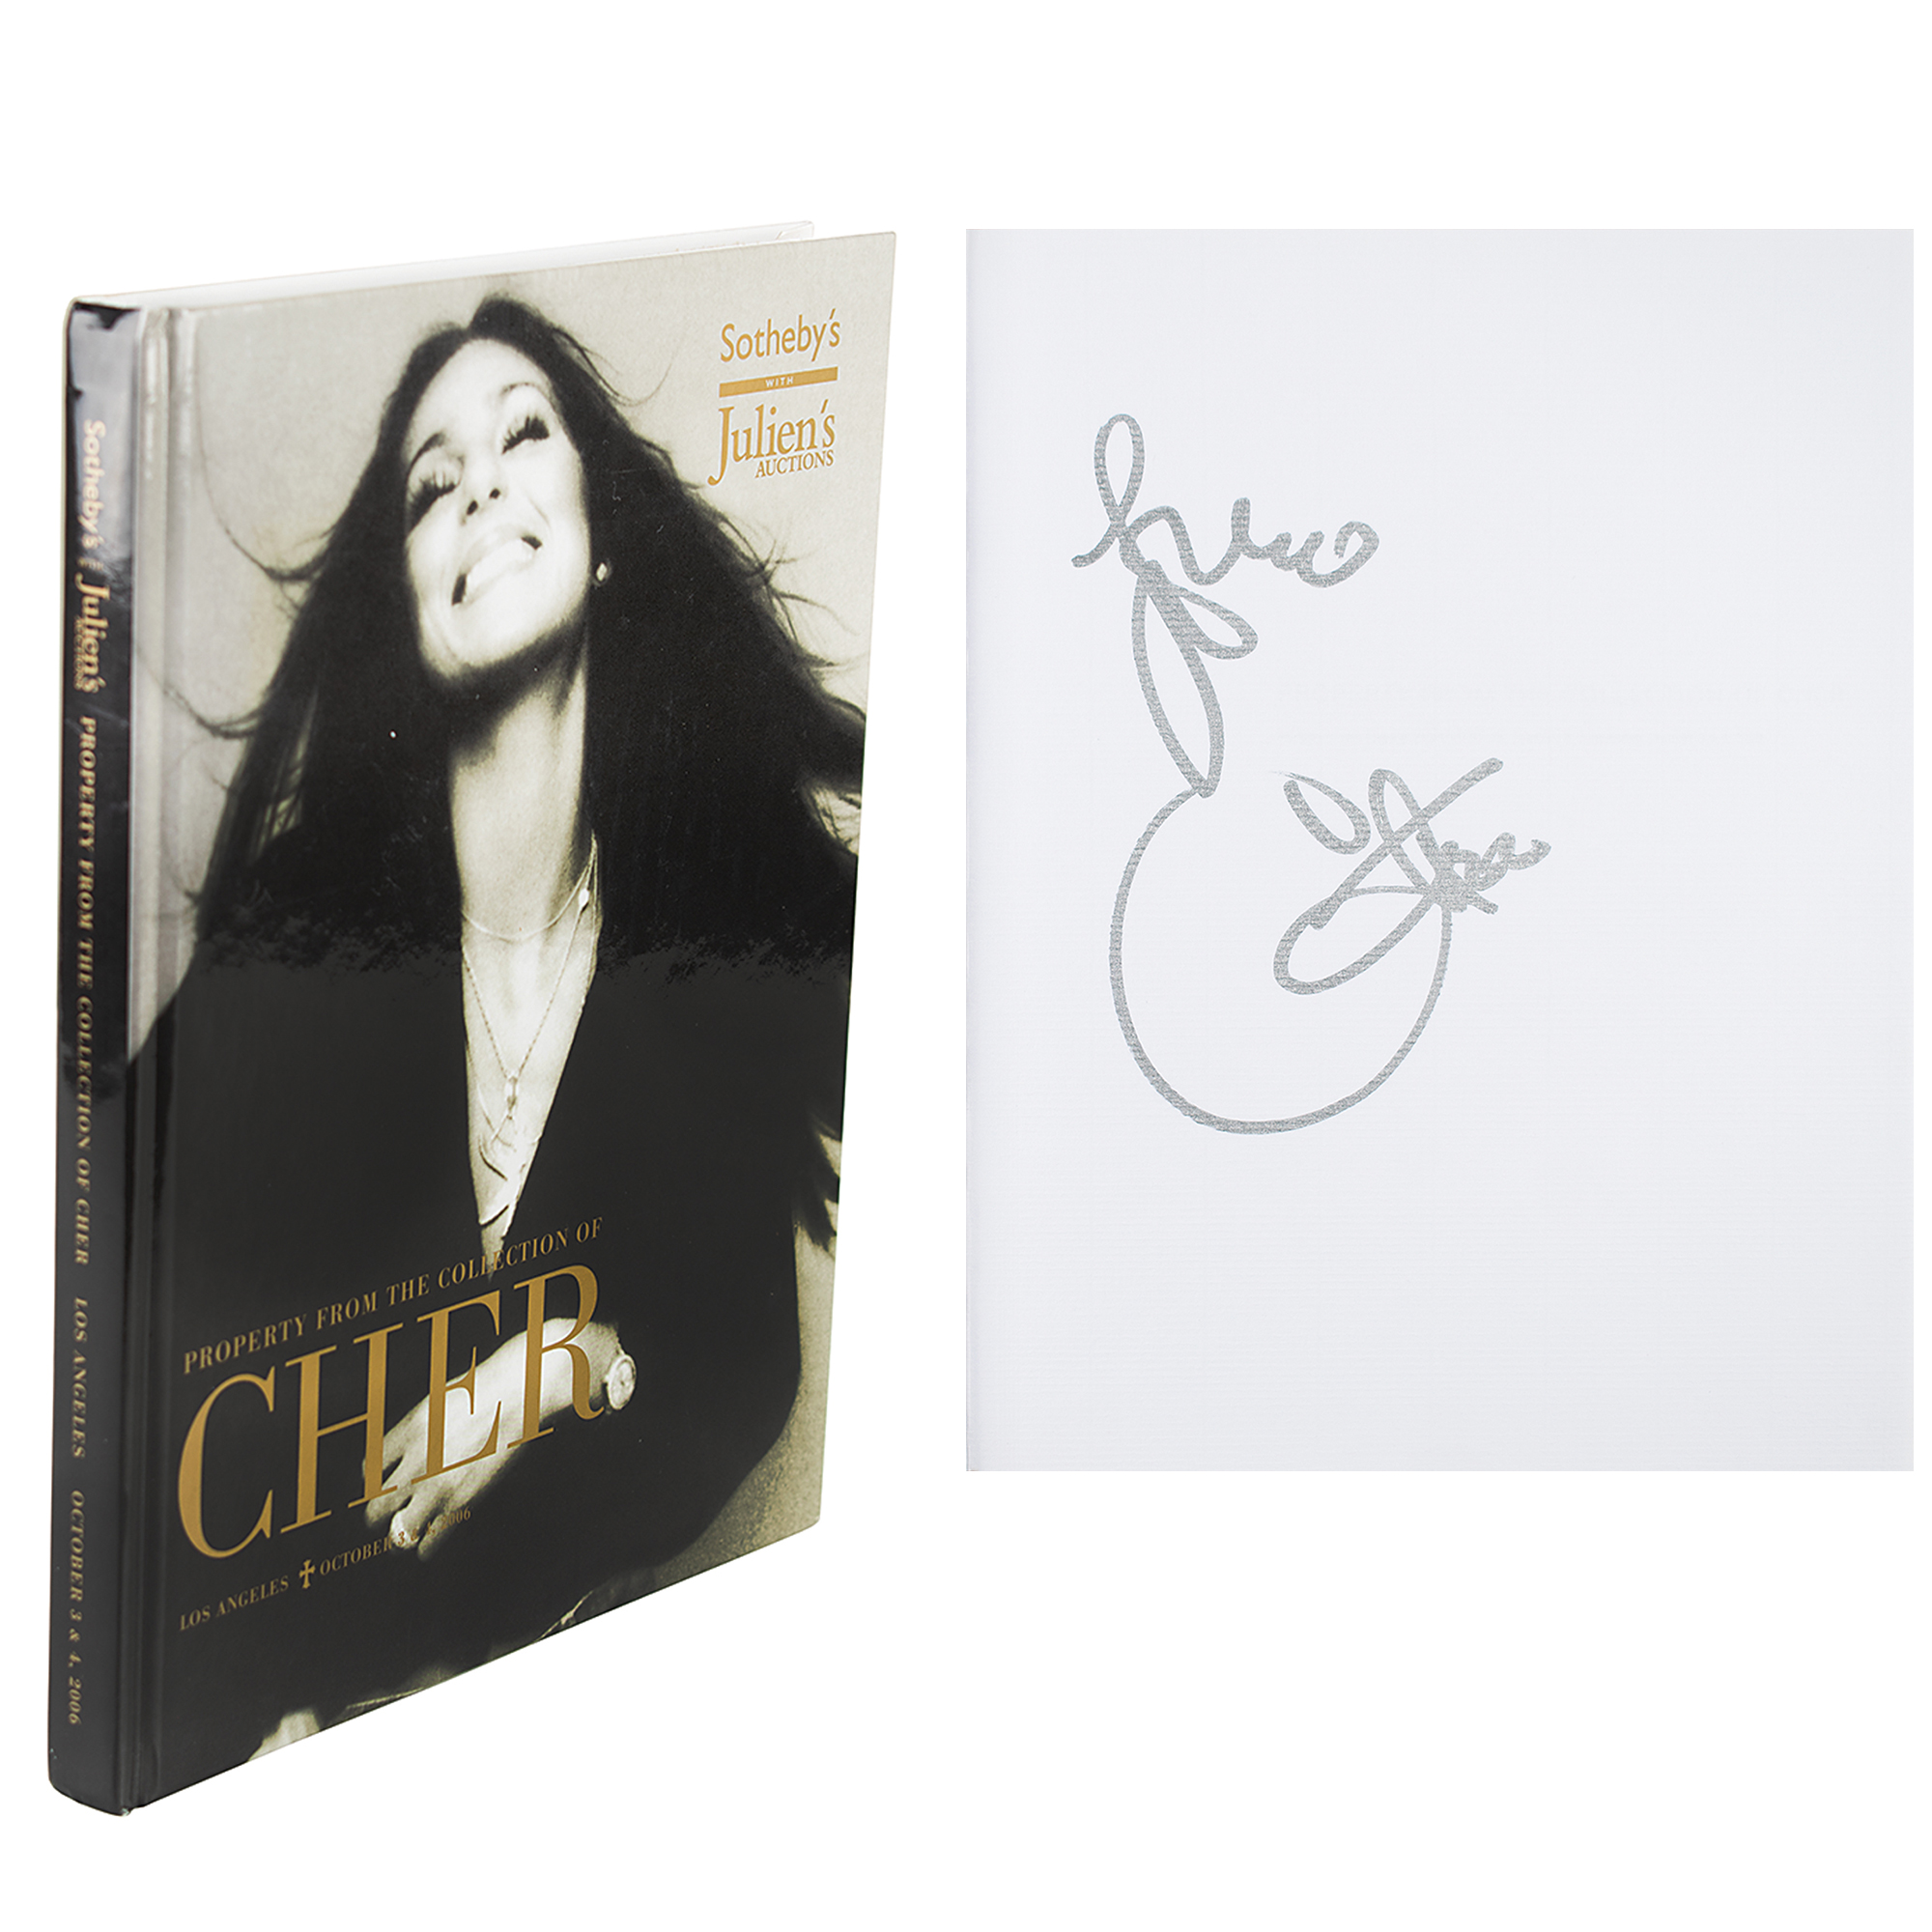 Lot #892 Cher Signed Book